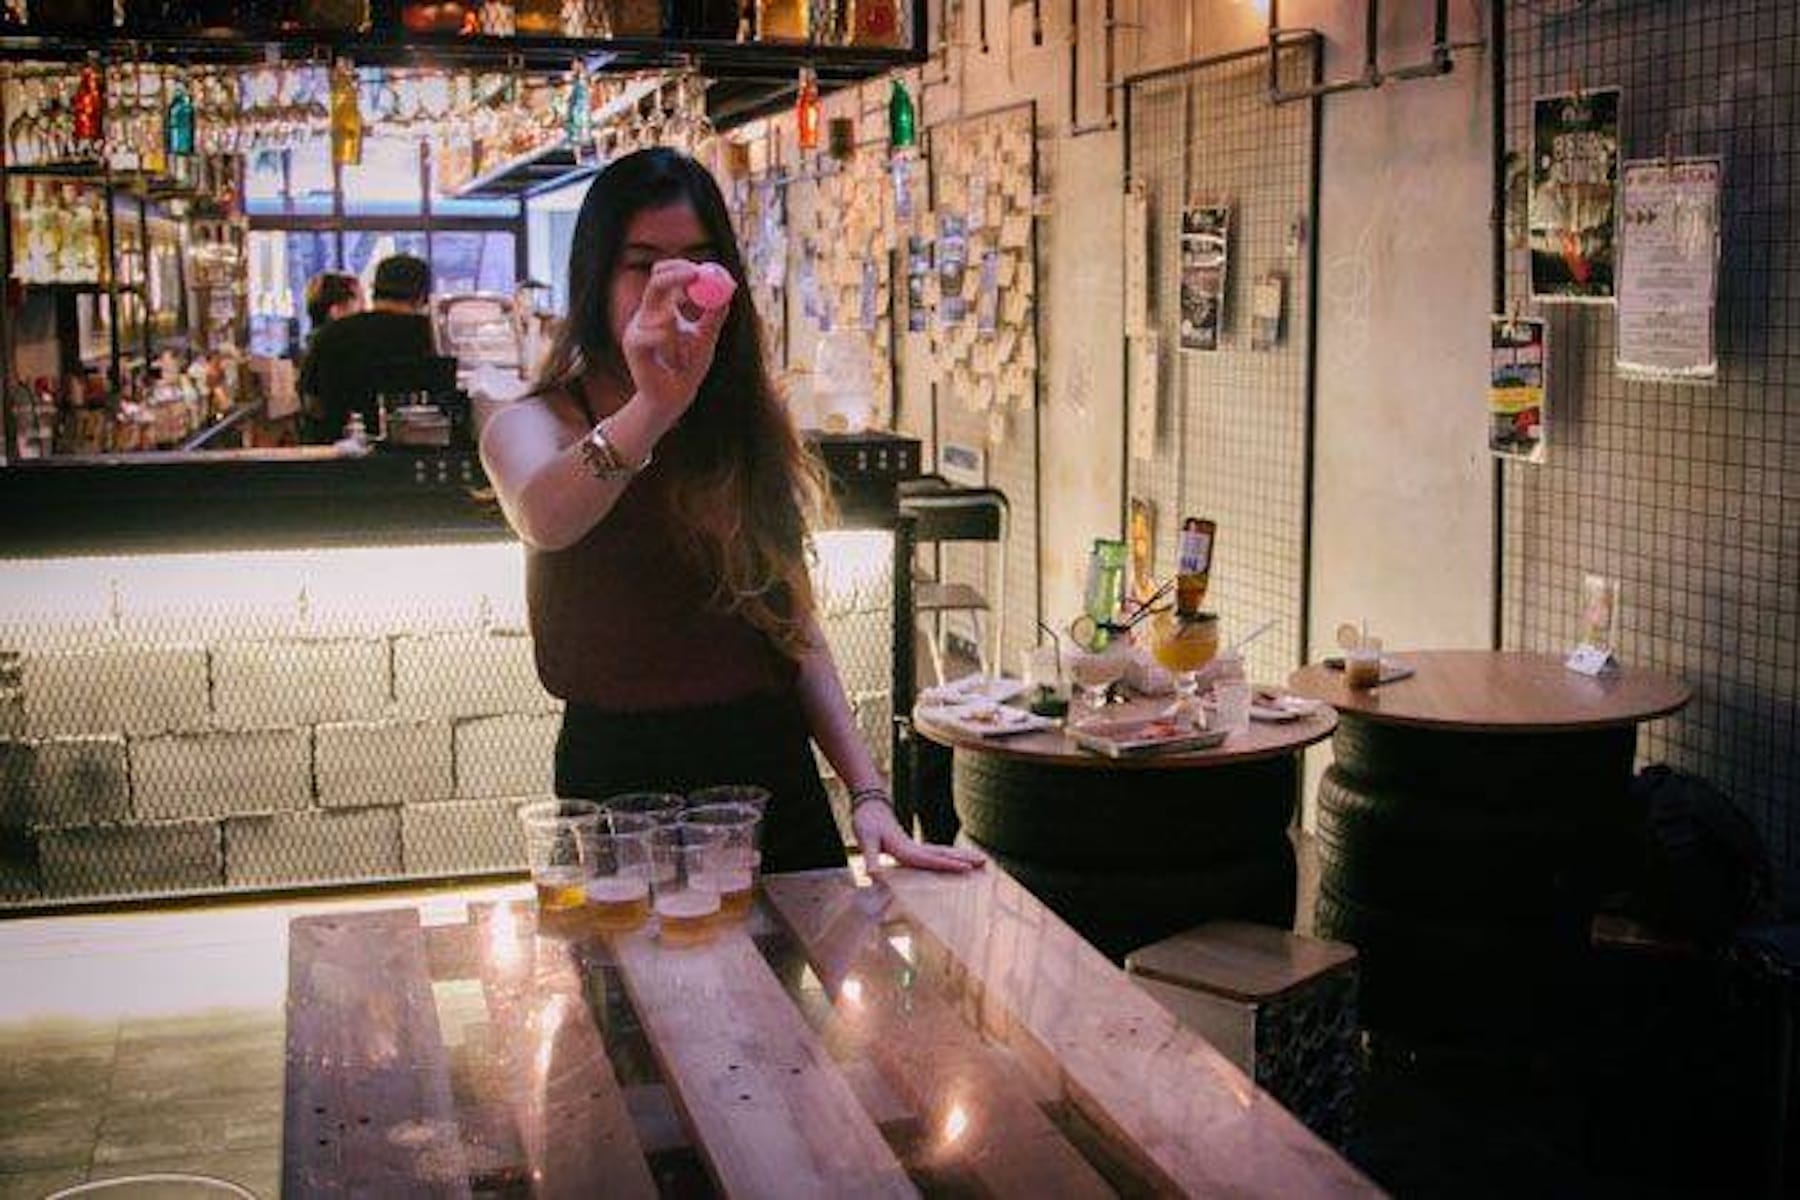 Fun Bars With Arcade Games And Drinking Challenges 9